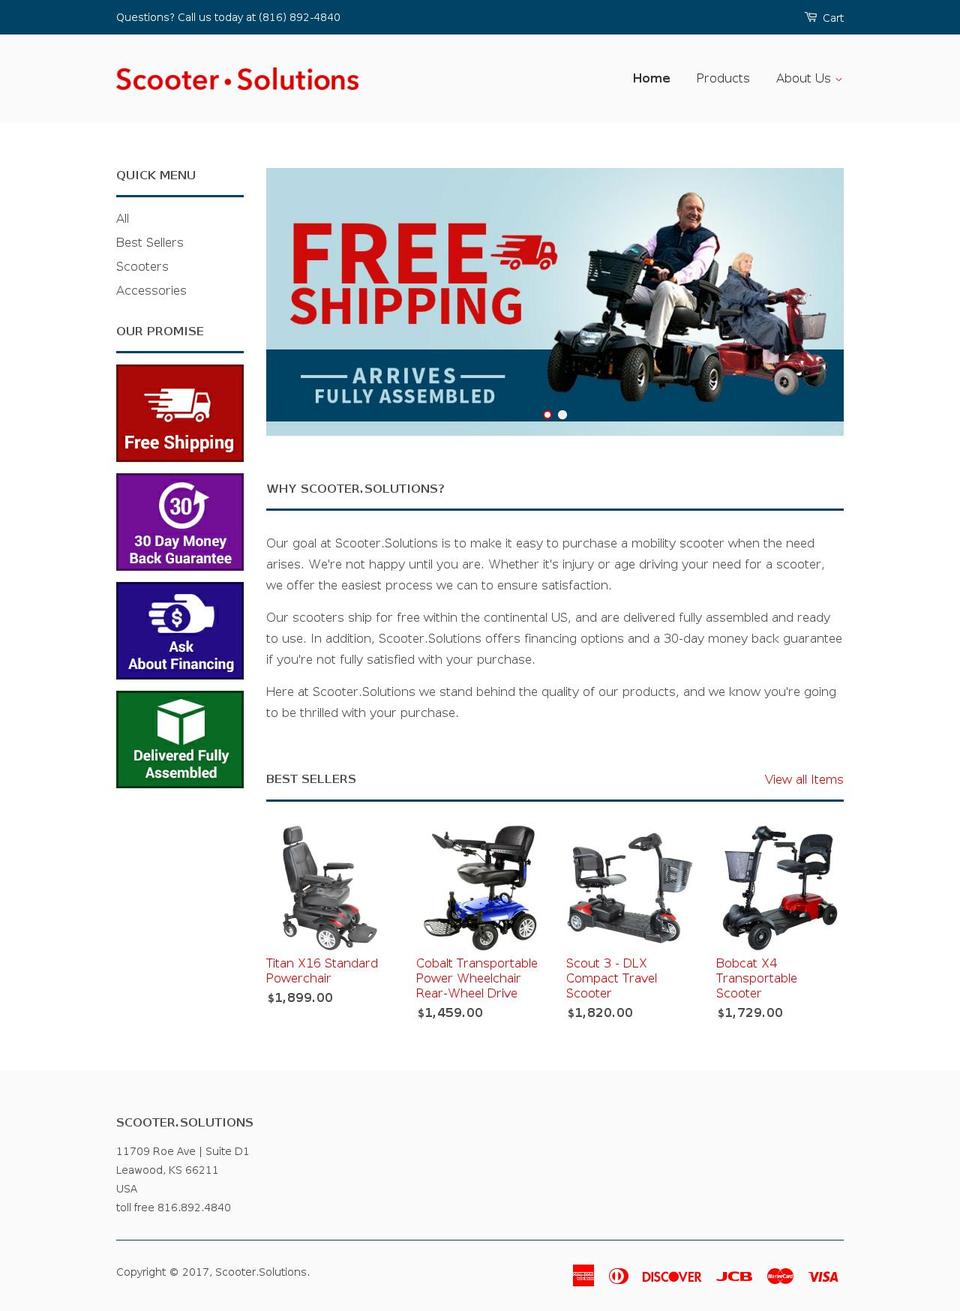 scooter.solutions shopify website screenshot